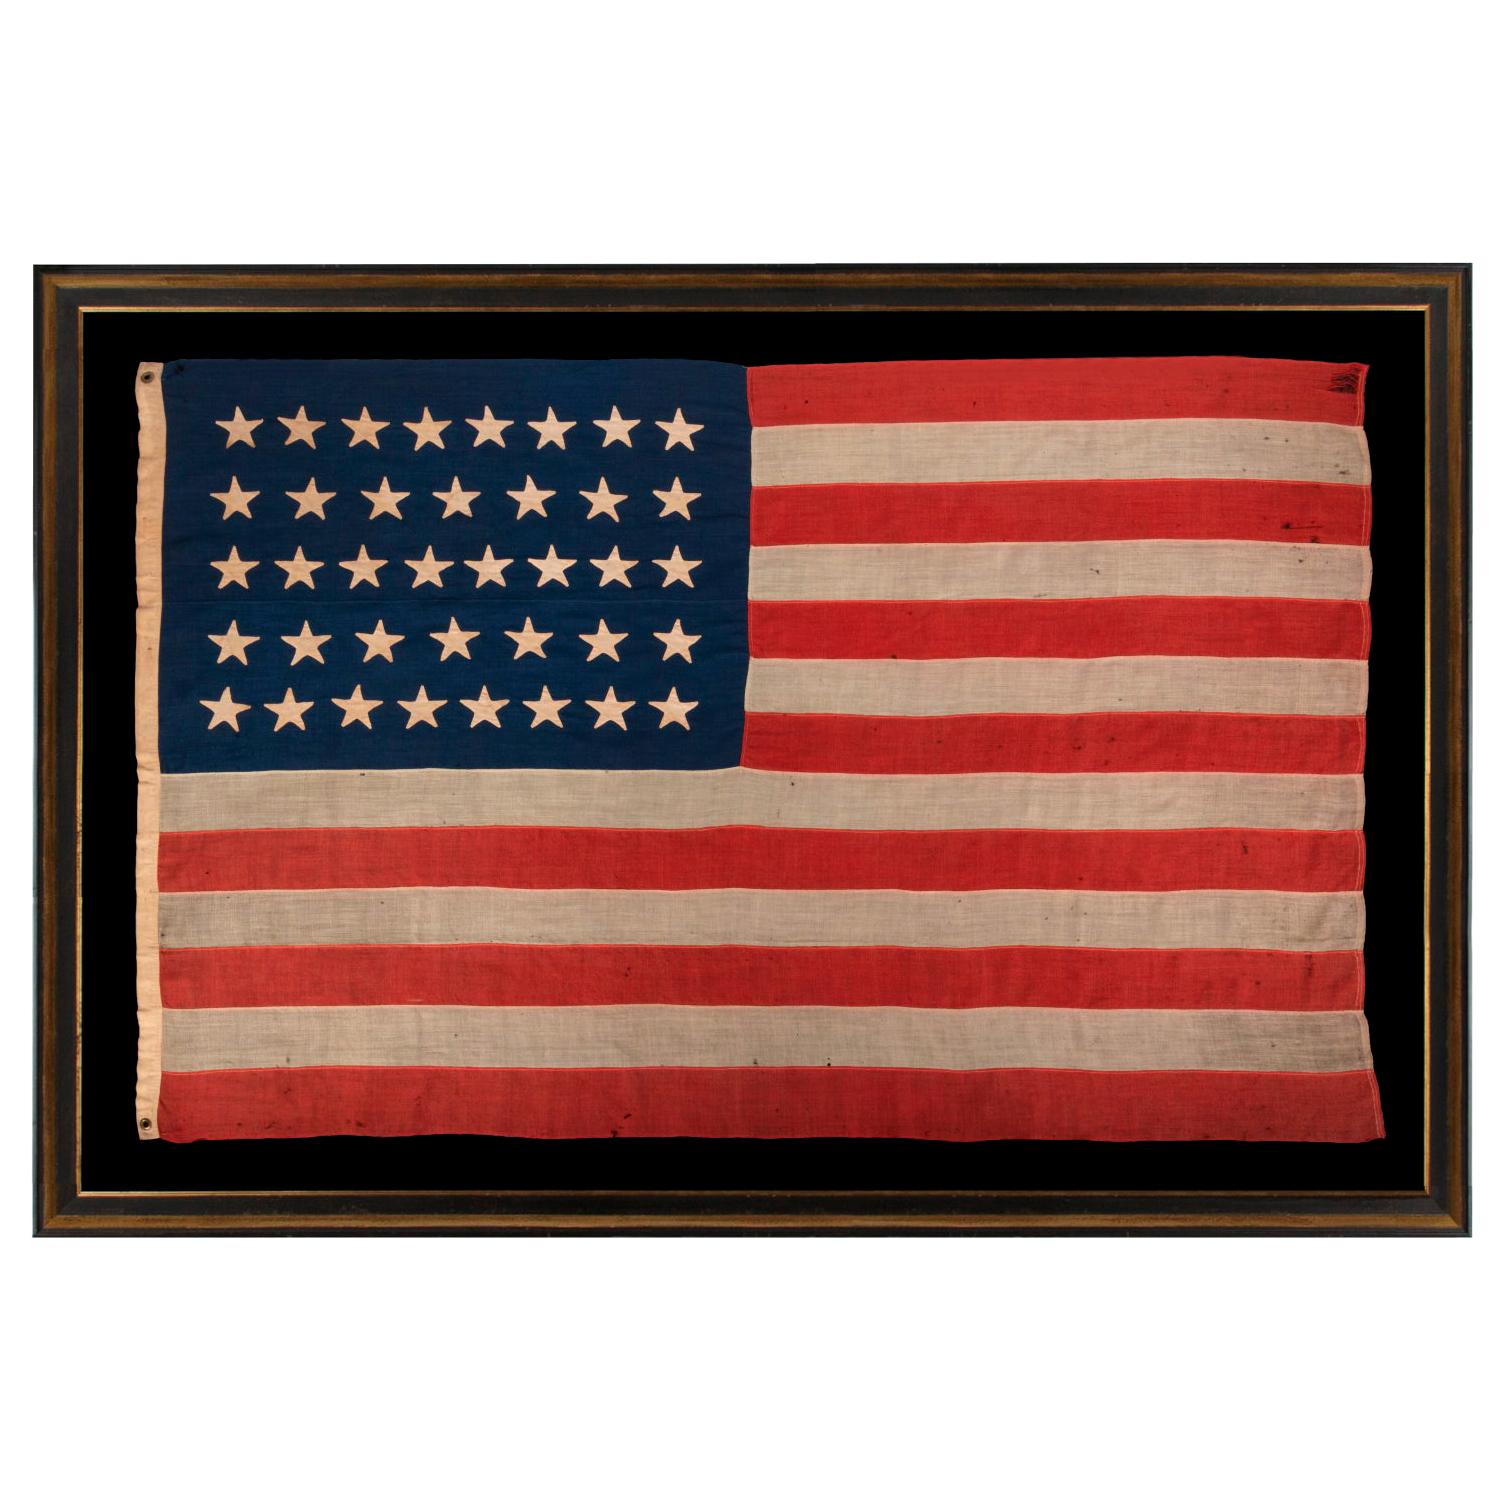 38 Star Antique American Flag with Hand-Sewn Stars, ca 1876-1889